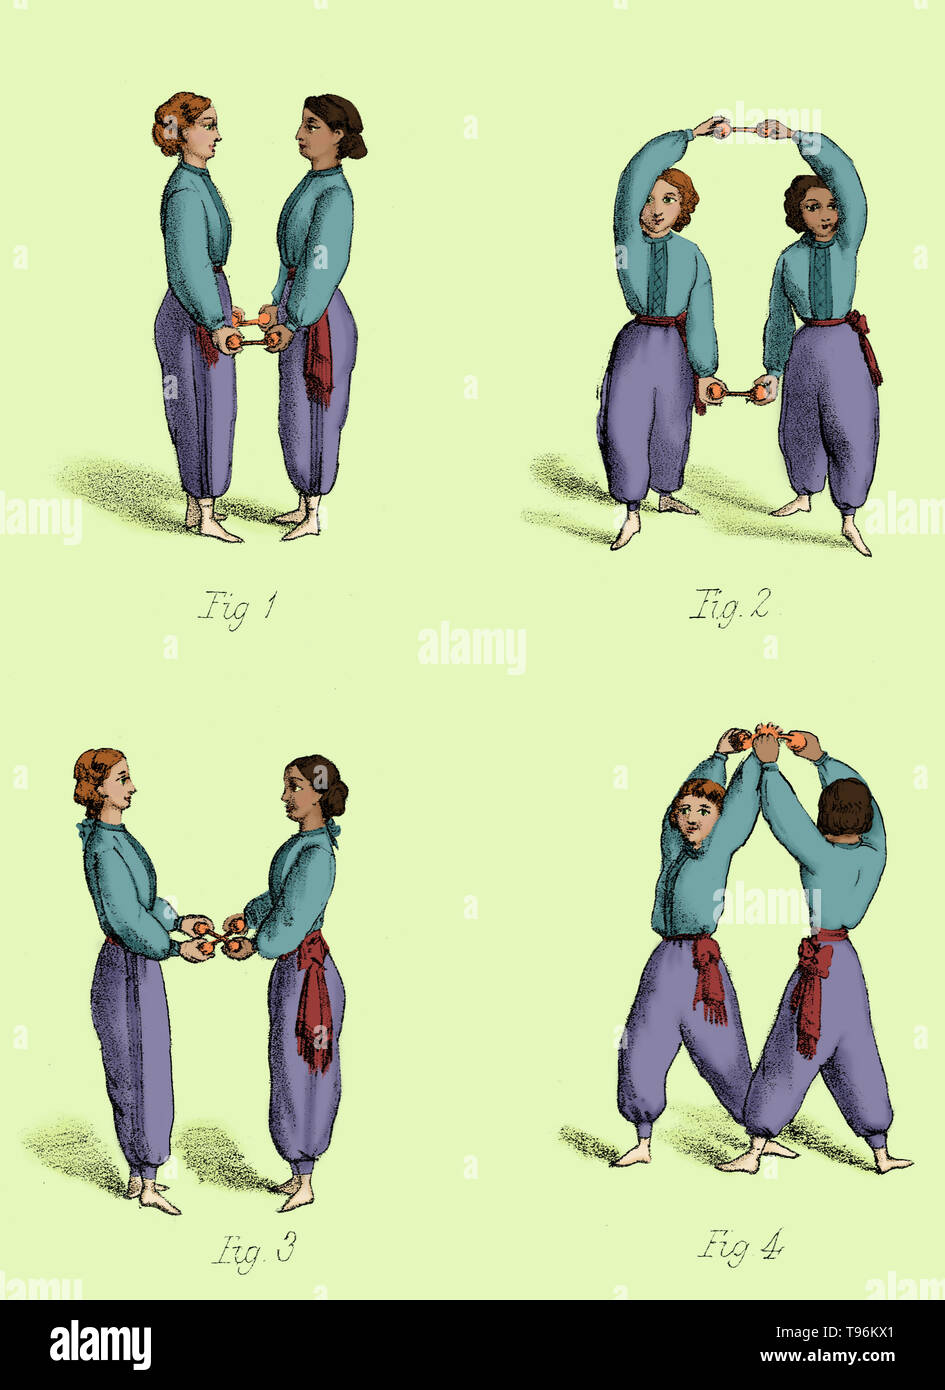 Gymnastics for ladies: a treatise on the science and art of calisthenic and gymnastic exercises by Madame Brenner. The model in this illustration is exercising with a piece of equipment called the Stirrup. Gymnastics is a sport practiced by men and women that requires balance, strength, flexibility, agility, coordination, endurance and control. The movements involved in gymnastics contribute to the development of the arms, legs, shoulders, back, chest and abdominal muscle groups. Stock Photo